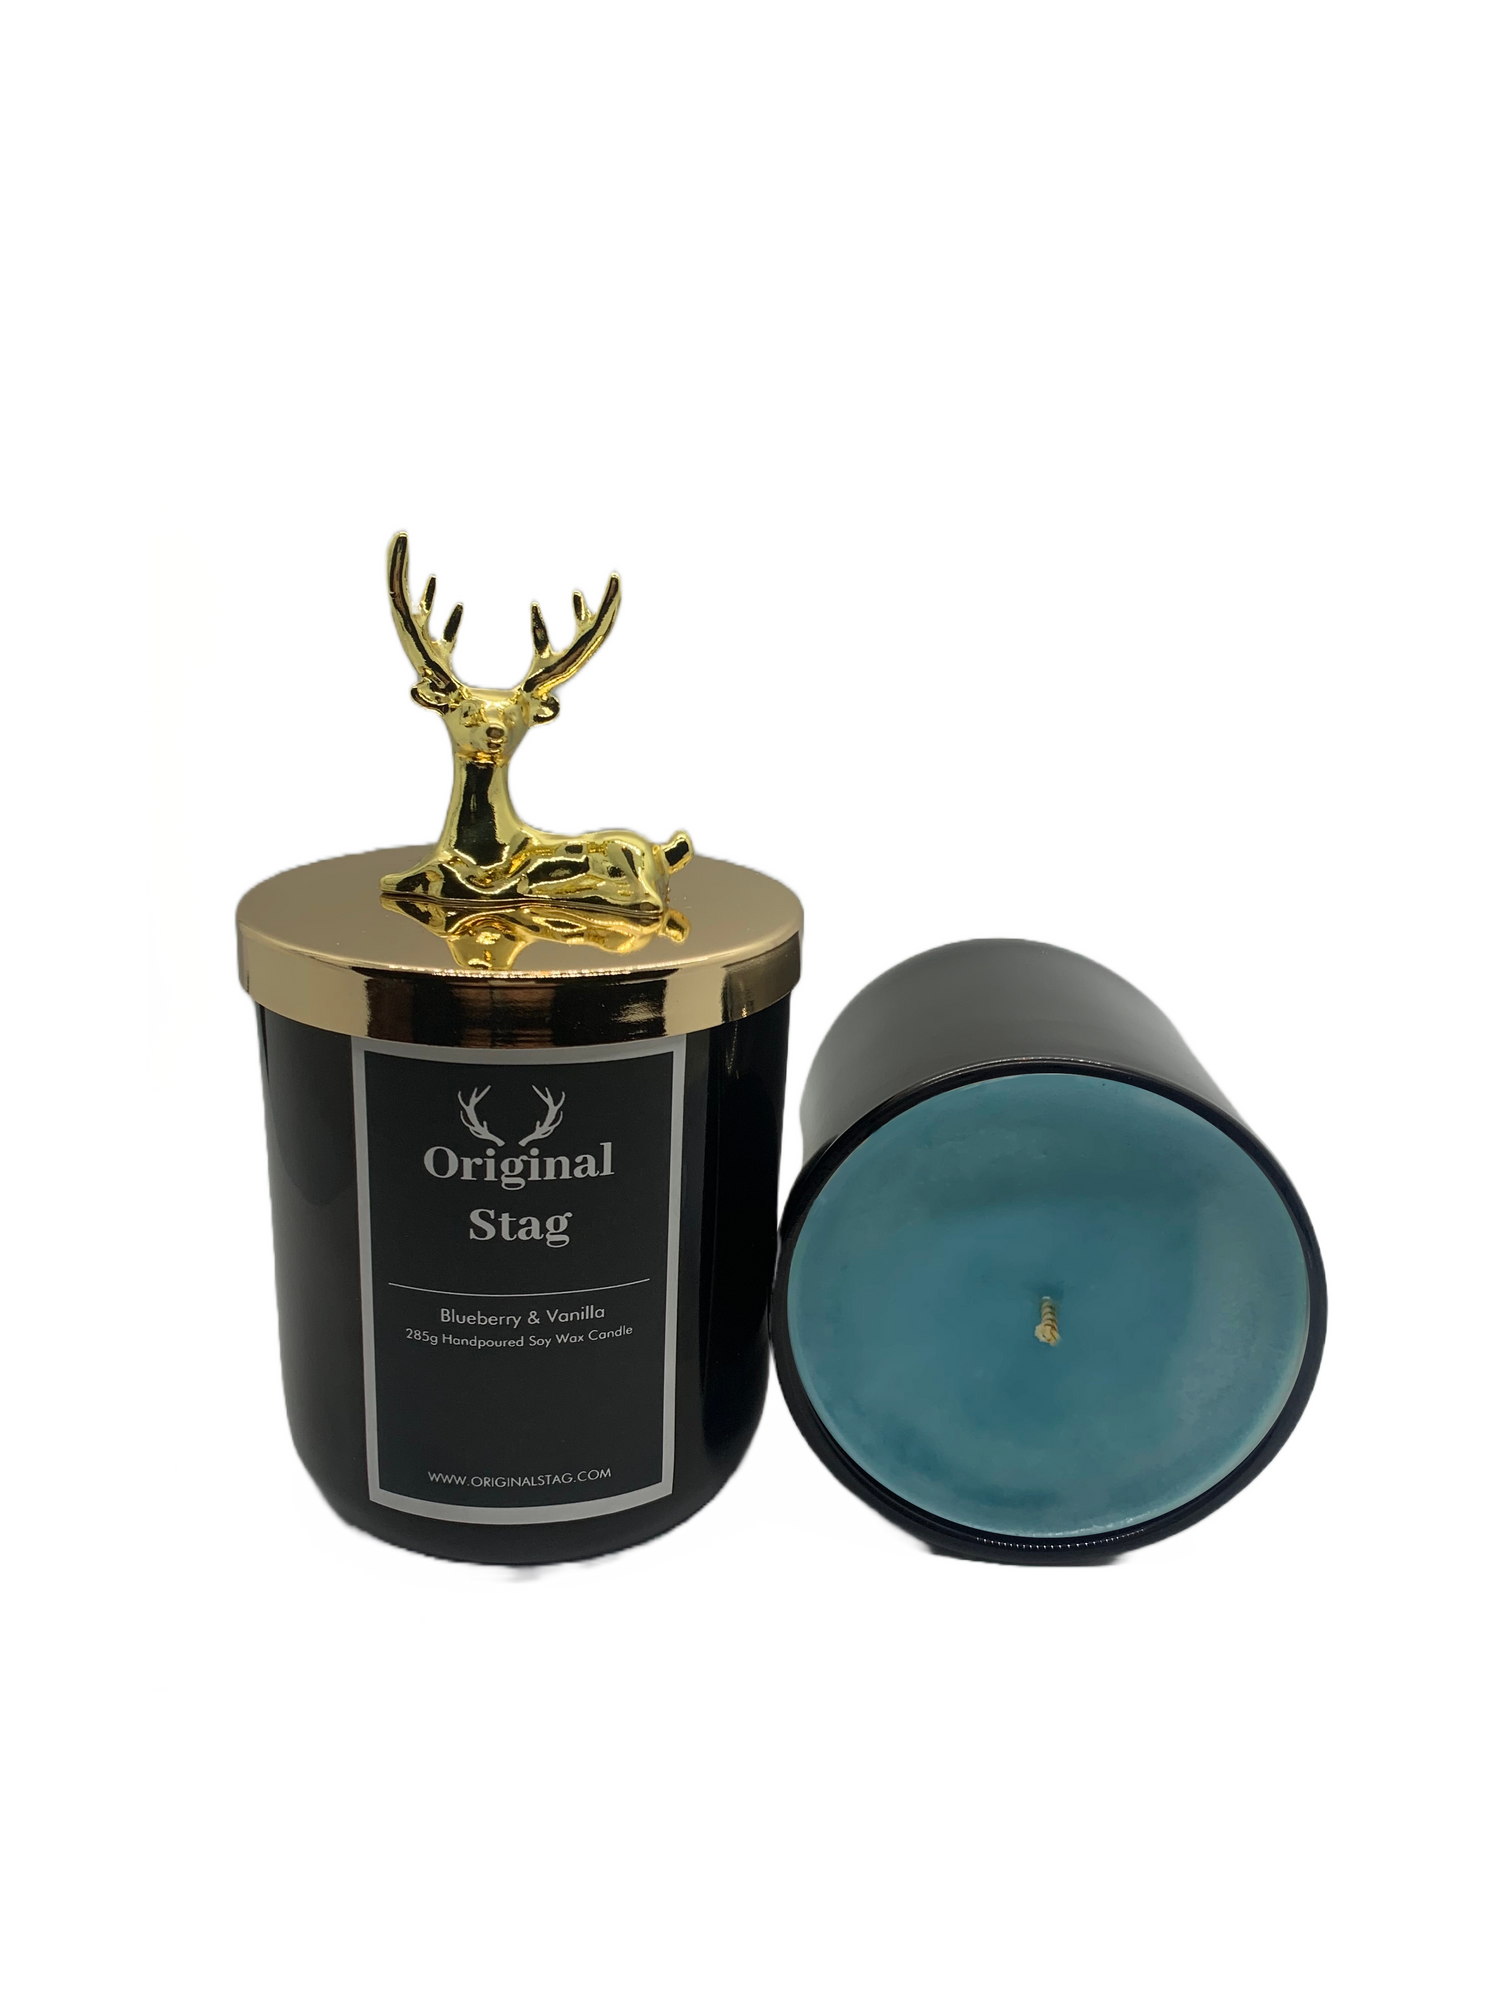 Blueberry and Vanilla Breeze scented candle in a glass jar with a light blue wax and a burning wick, emitting a sweet and fruity blueberry scent mixed with a creamy vanilla undertone